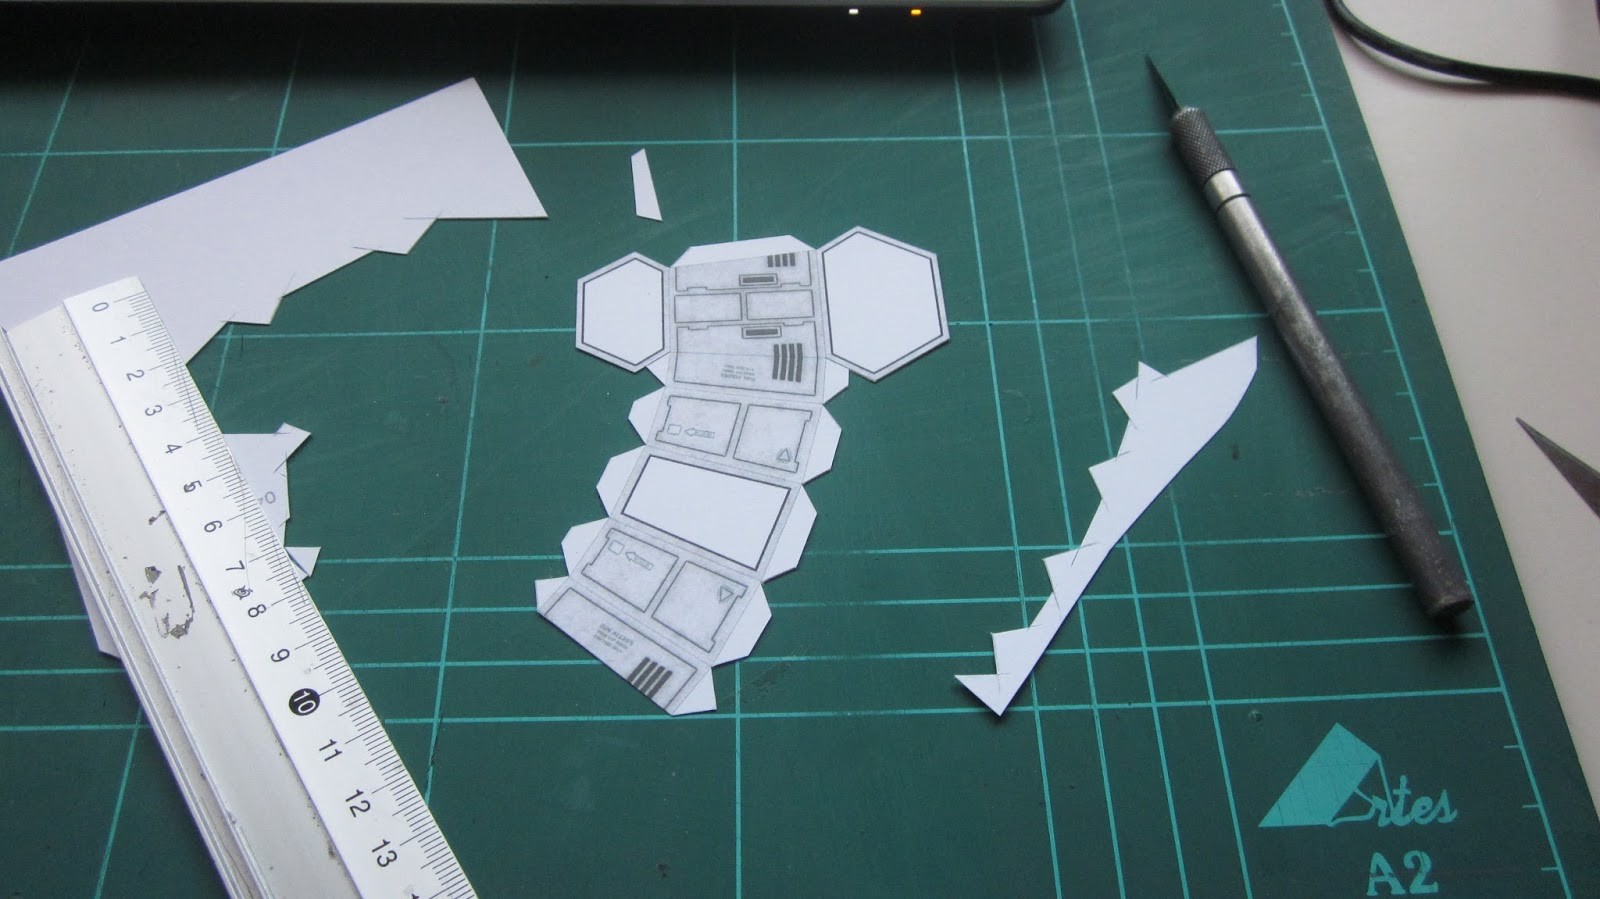 Spaceship Papercraft the Acetone Pit Scenery Building A Papercraft Spaceship